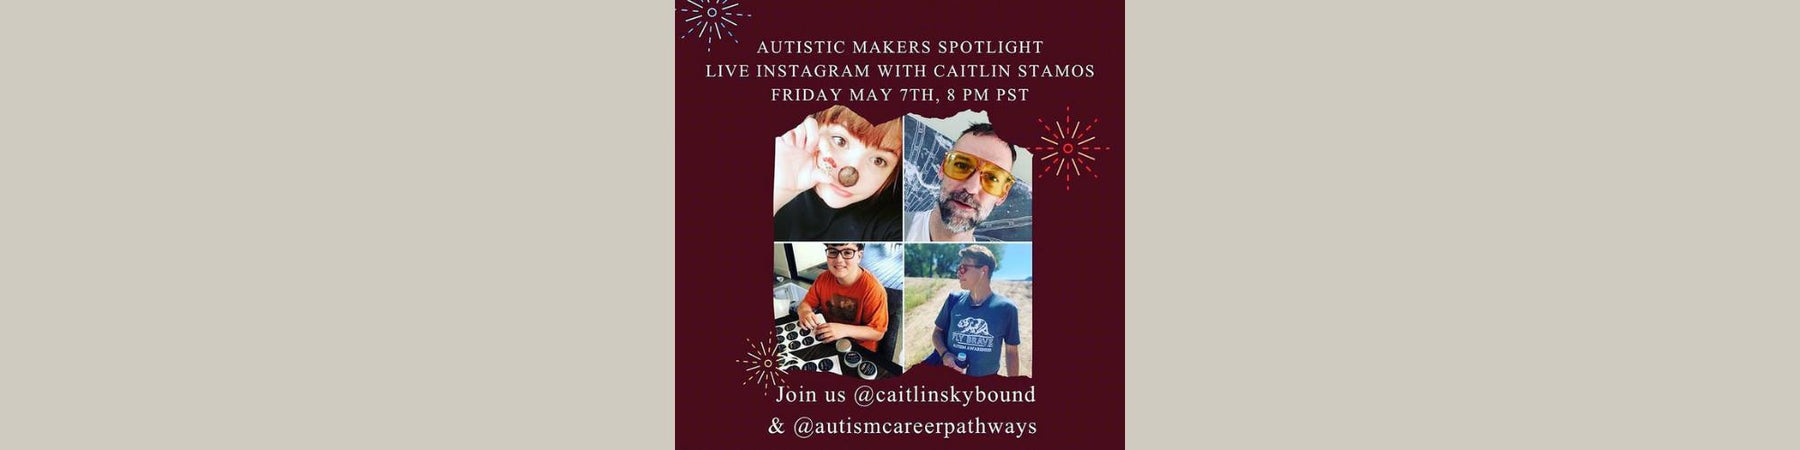 Tune in to hear Kai chat to @caitlinskybound on the Autistic Makers Spotlight Live!!!